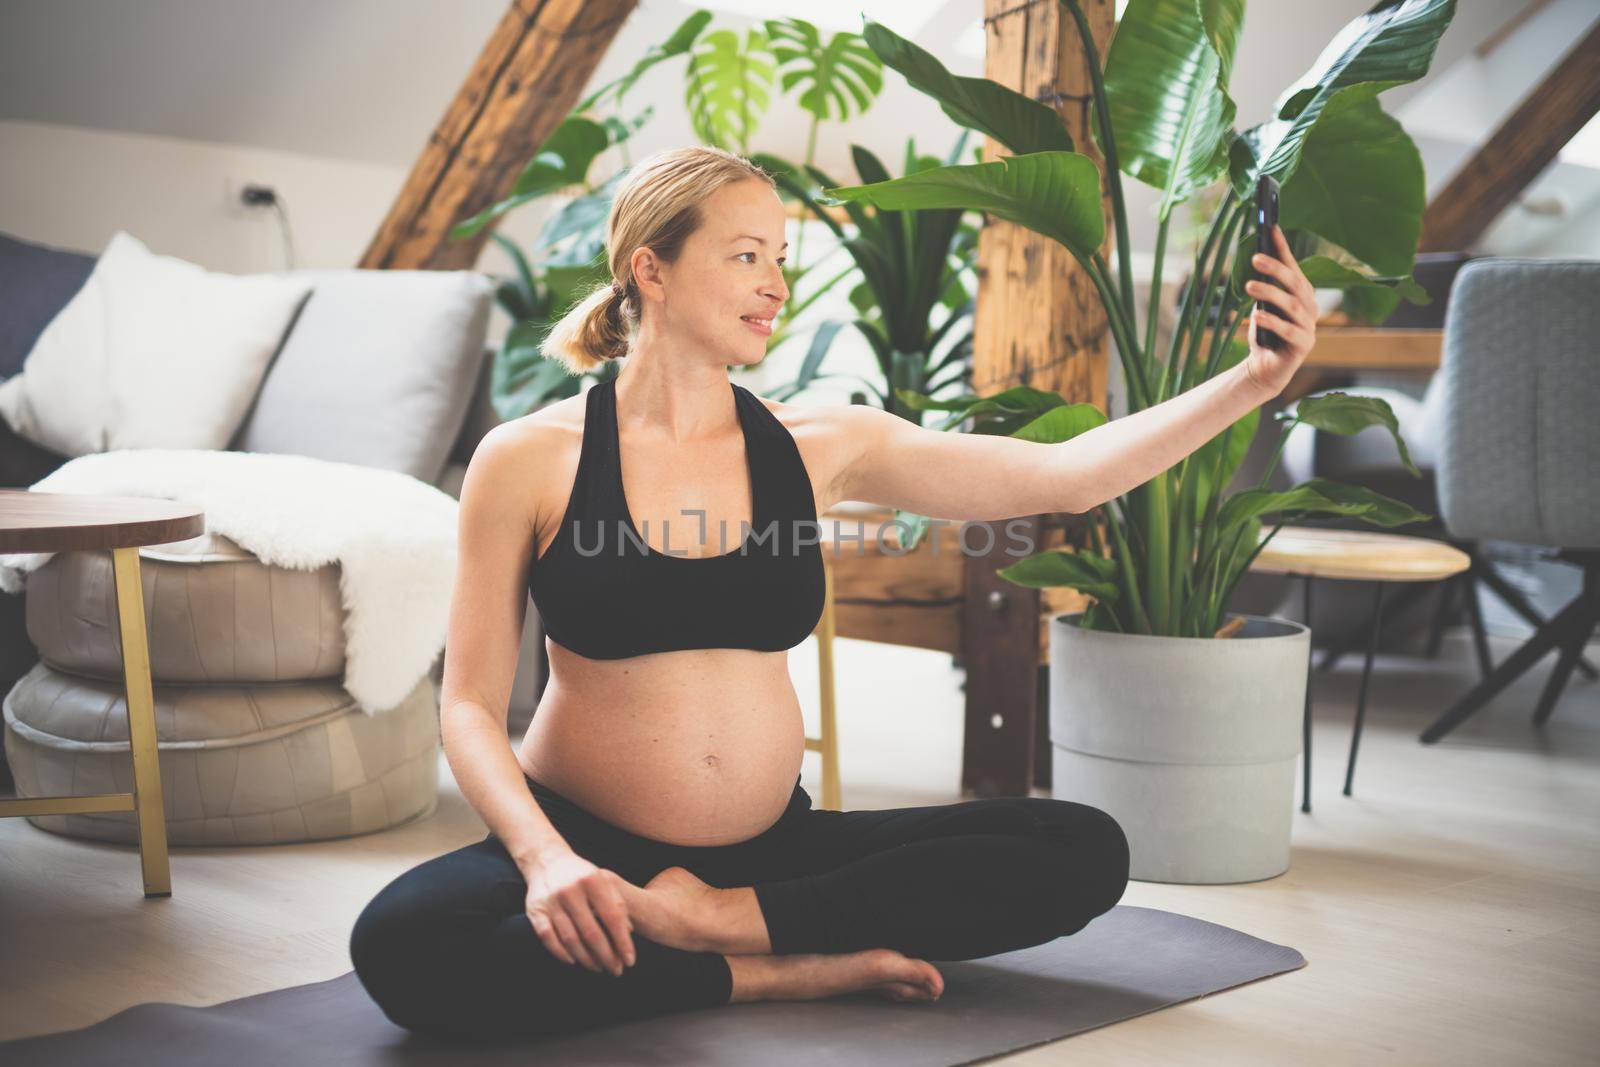 Young happy and cheerful beautiful pregnant woman taking selfie with her mobile phone while staying fit, sporty and active on her maternity leave. Motherhood, pregnancy, yoga concept. by kasto